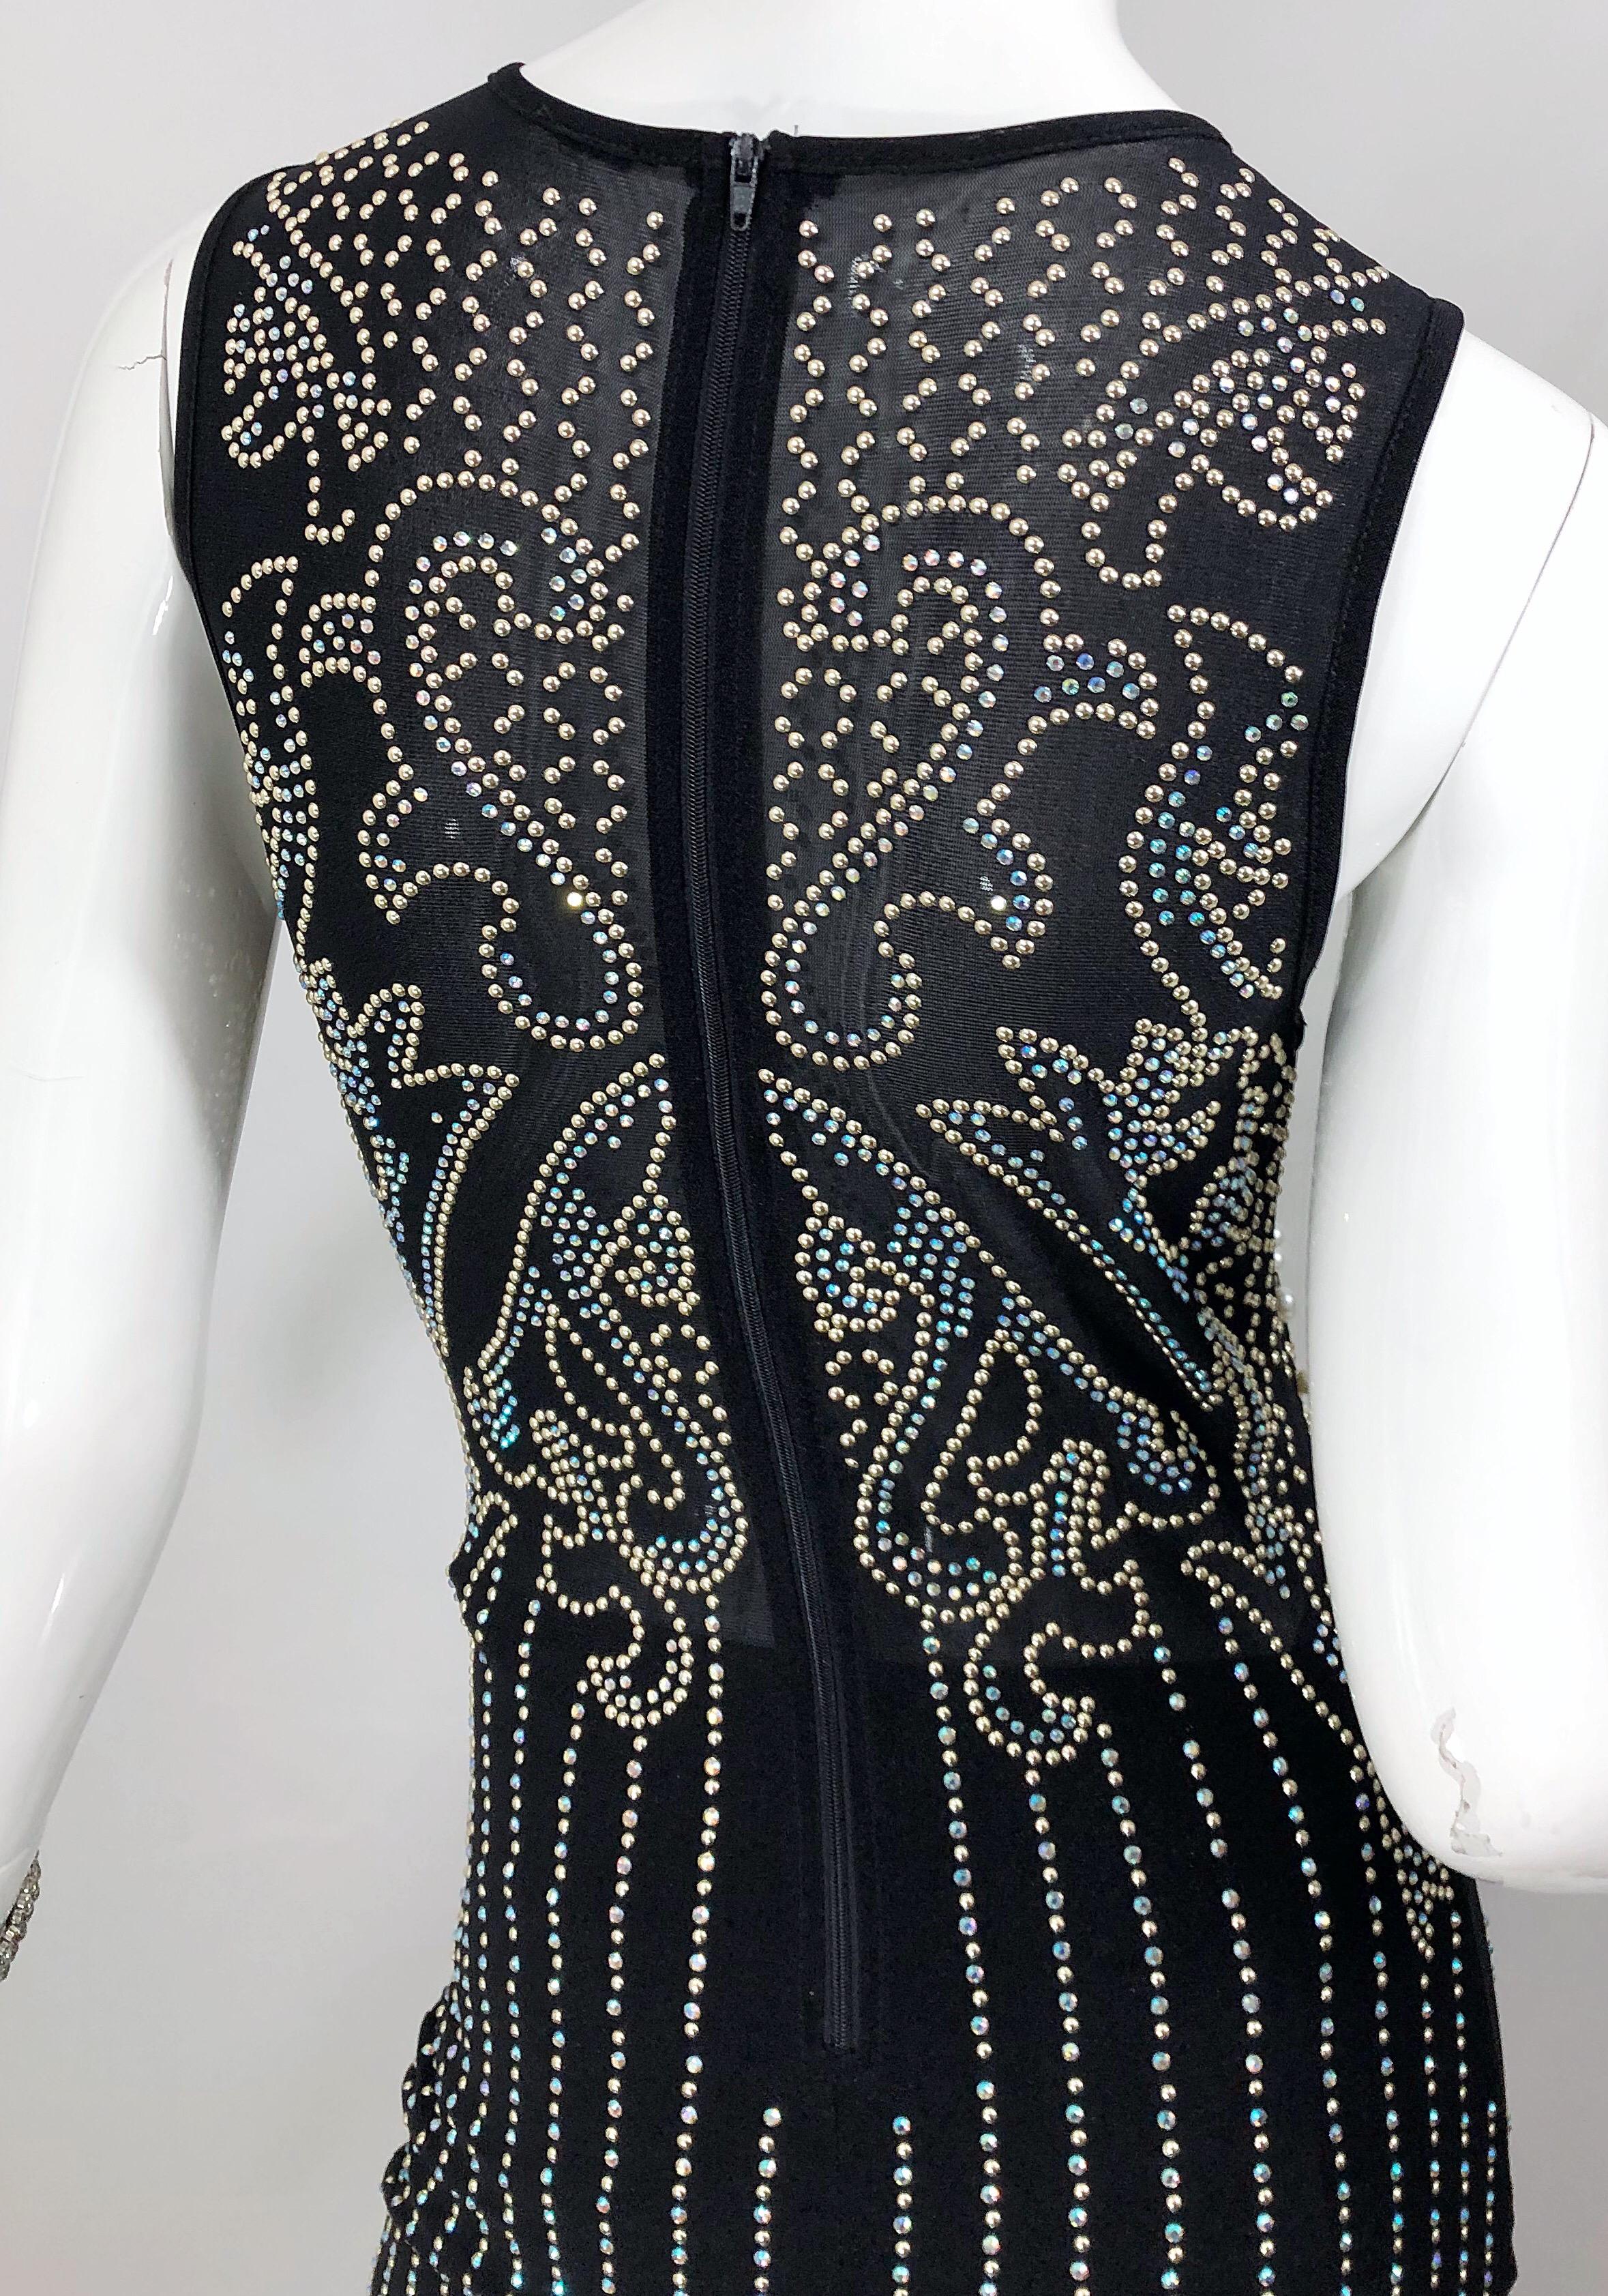 Incredible 1990s Black Pearl Rhinestone Studded Sheer Mesh Vintage Gown For Sale 2